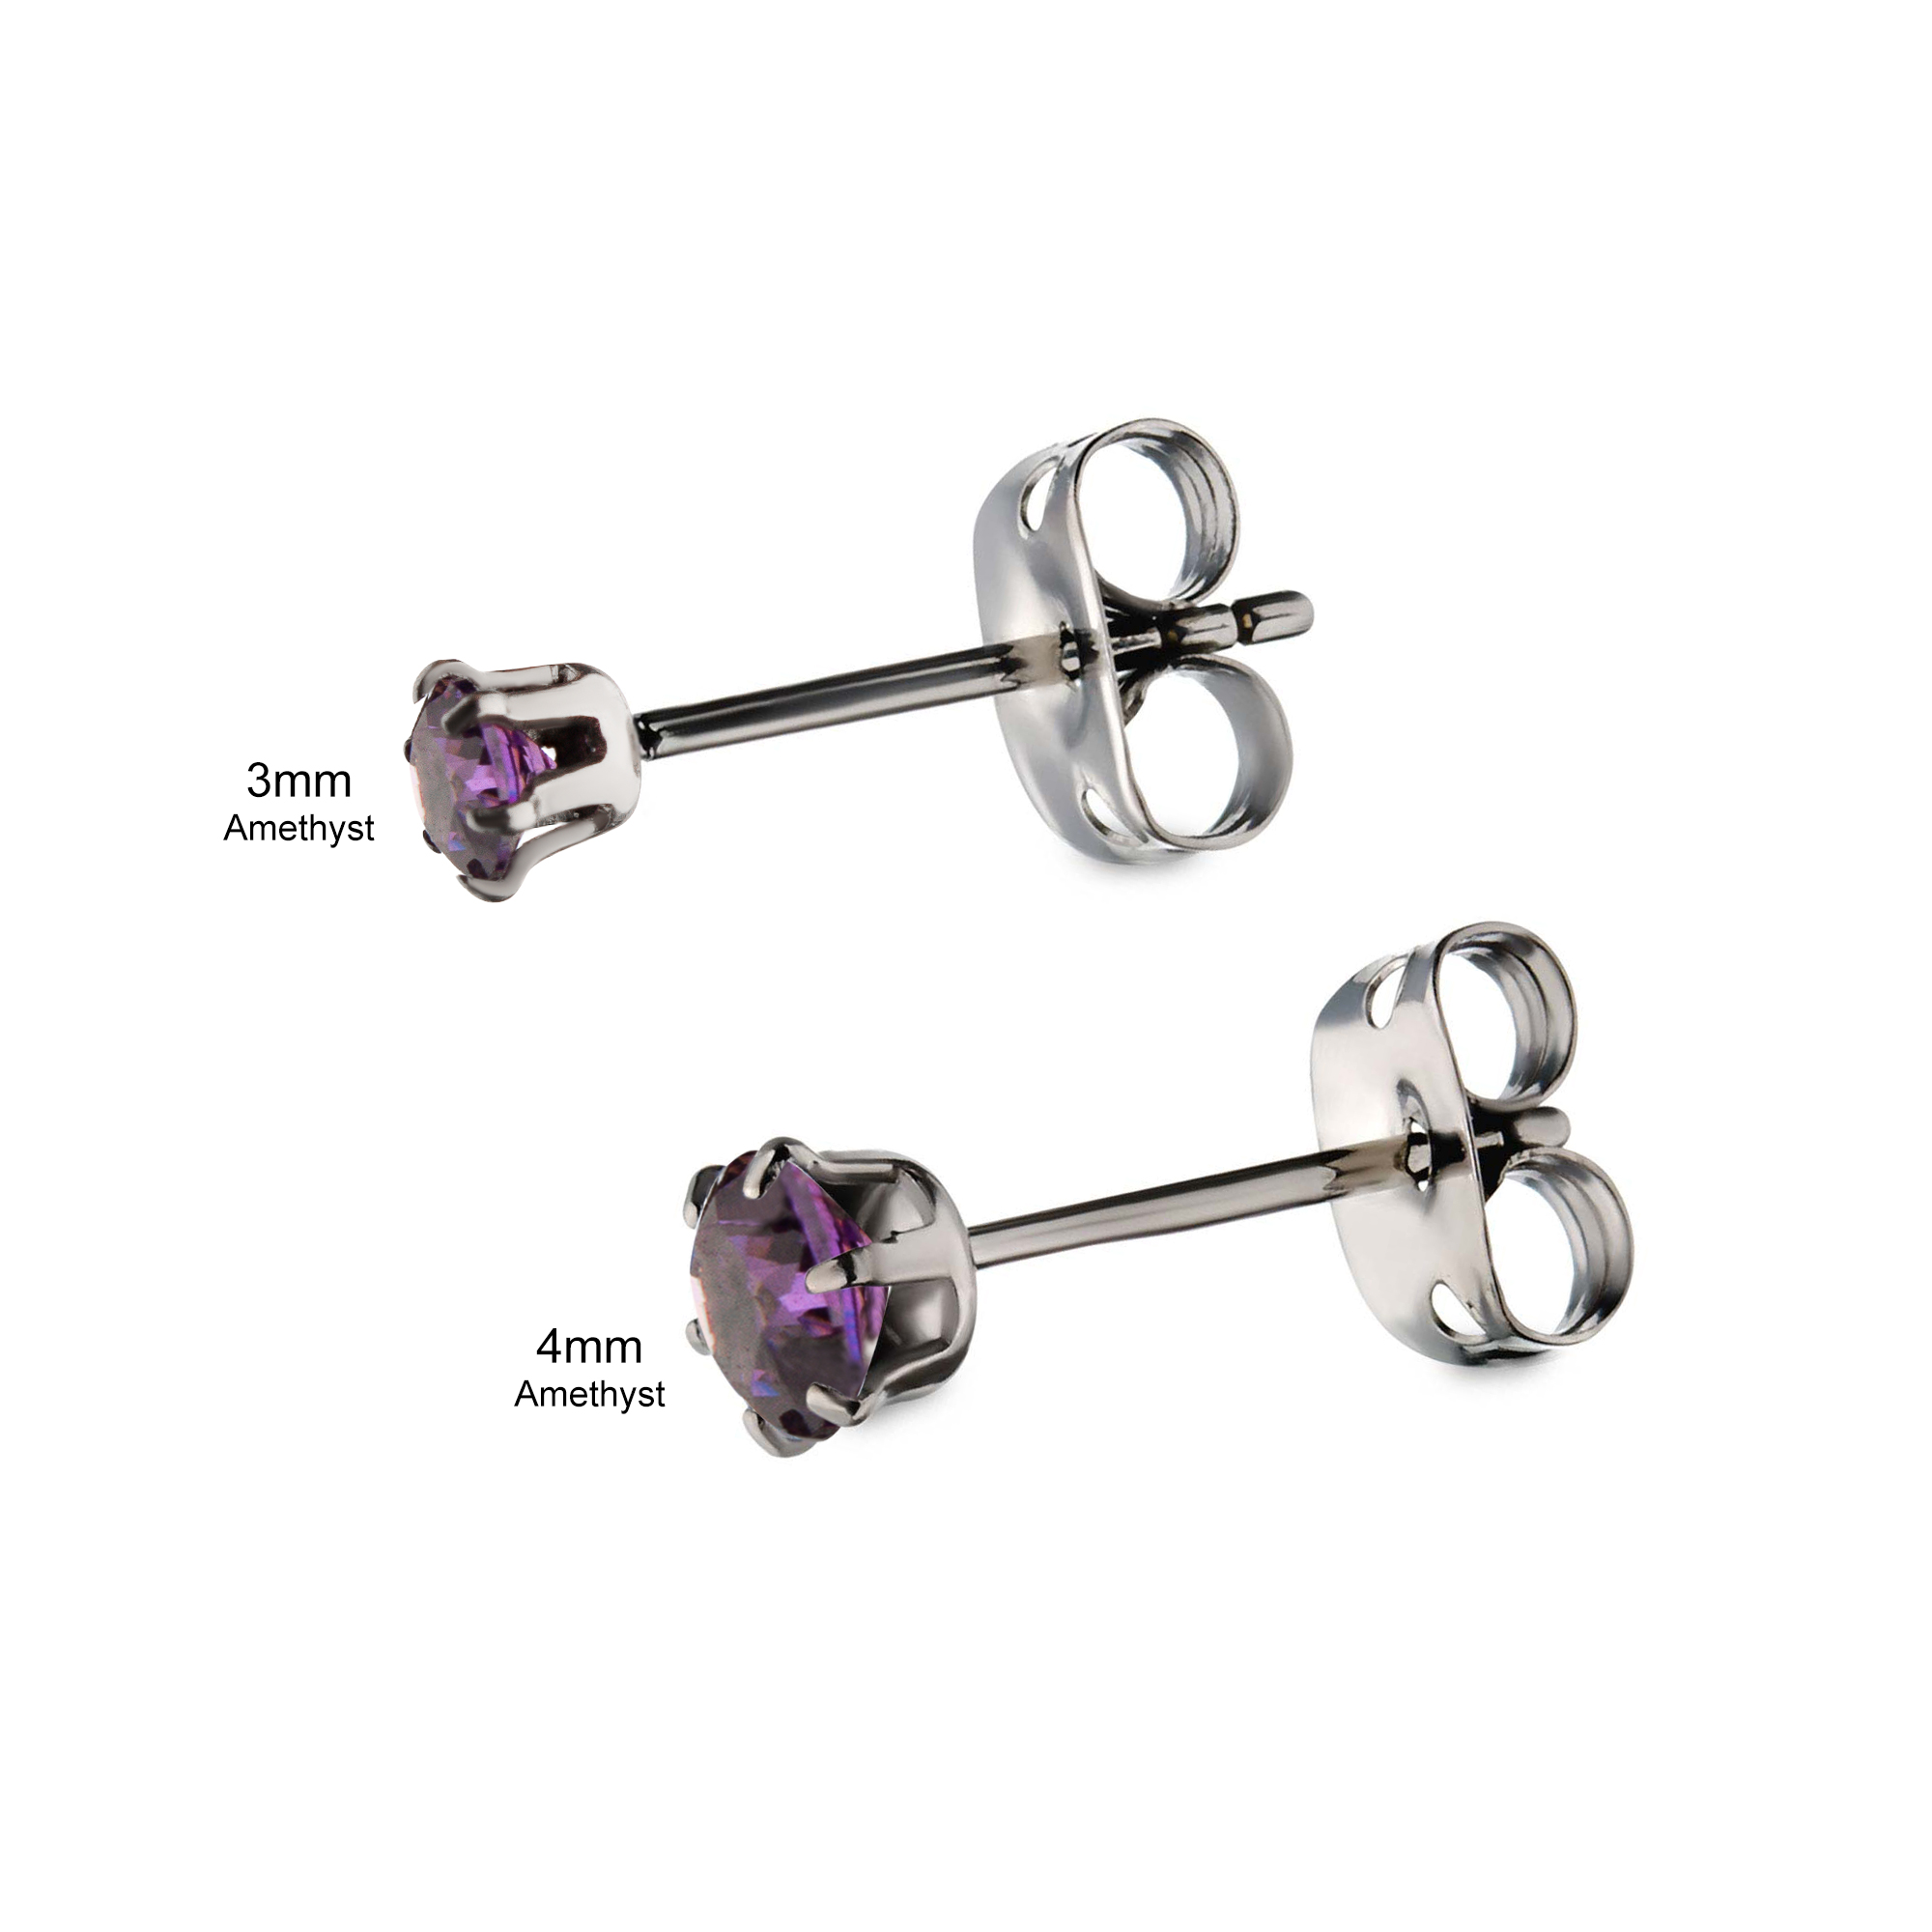 20g Titanium Post and Butterfly Back with Prong Set CZ Stud Earrings Image 5 P.K. Bennett Jewelers Mundelein, IL